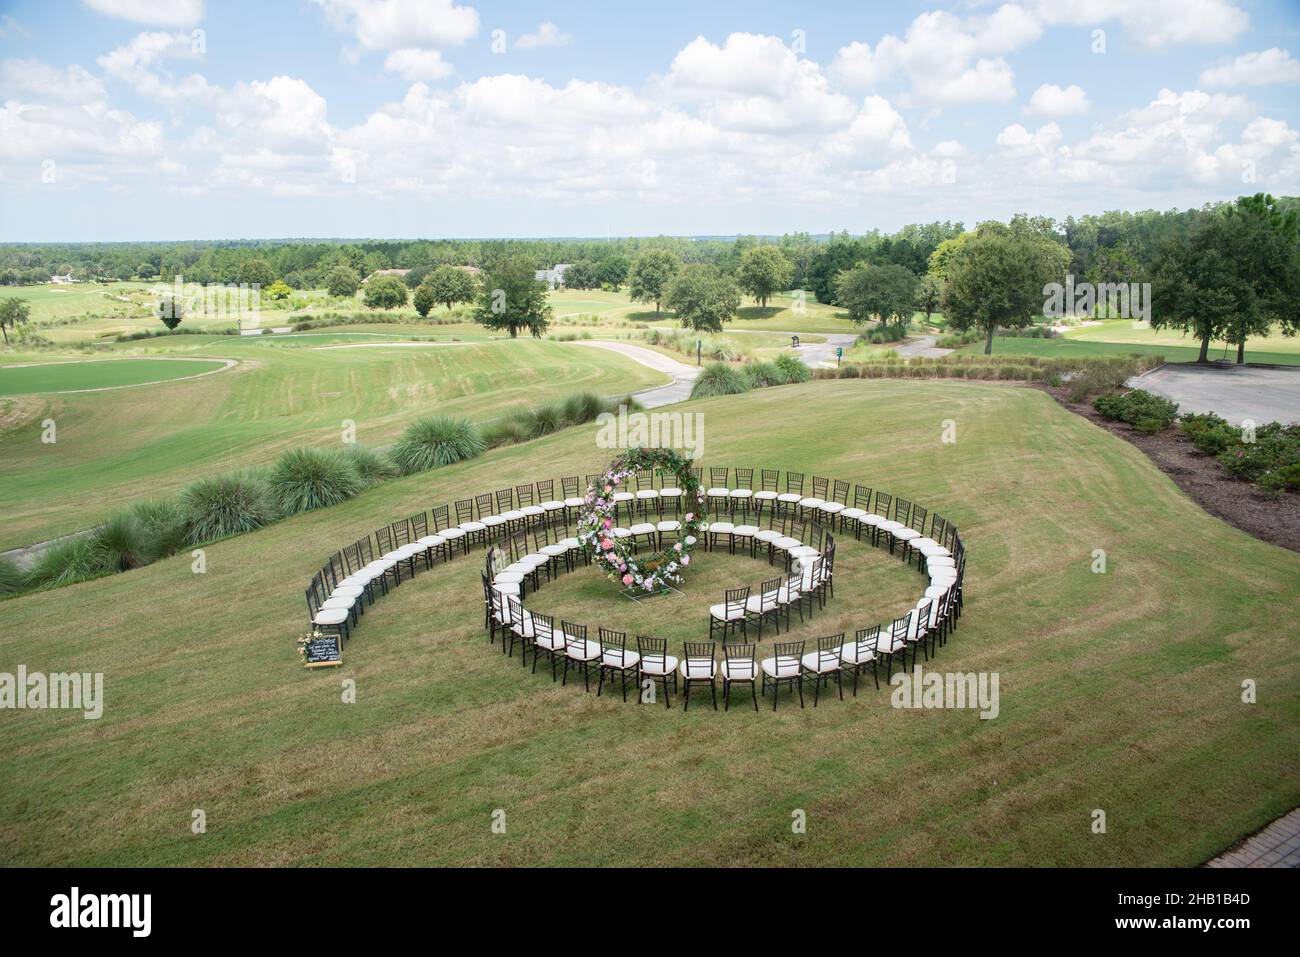 Unique round spiral chair pattern wedding ceremony setting at rolling hills countryside with brown chiavari chairs and white cushions Stock Photo